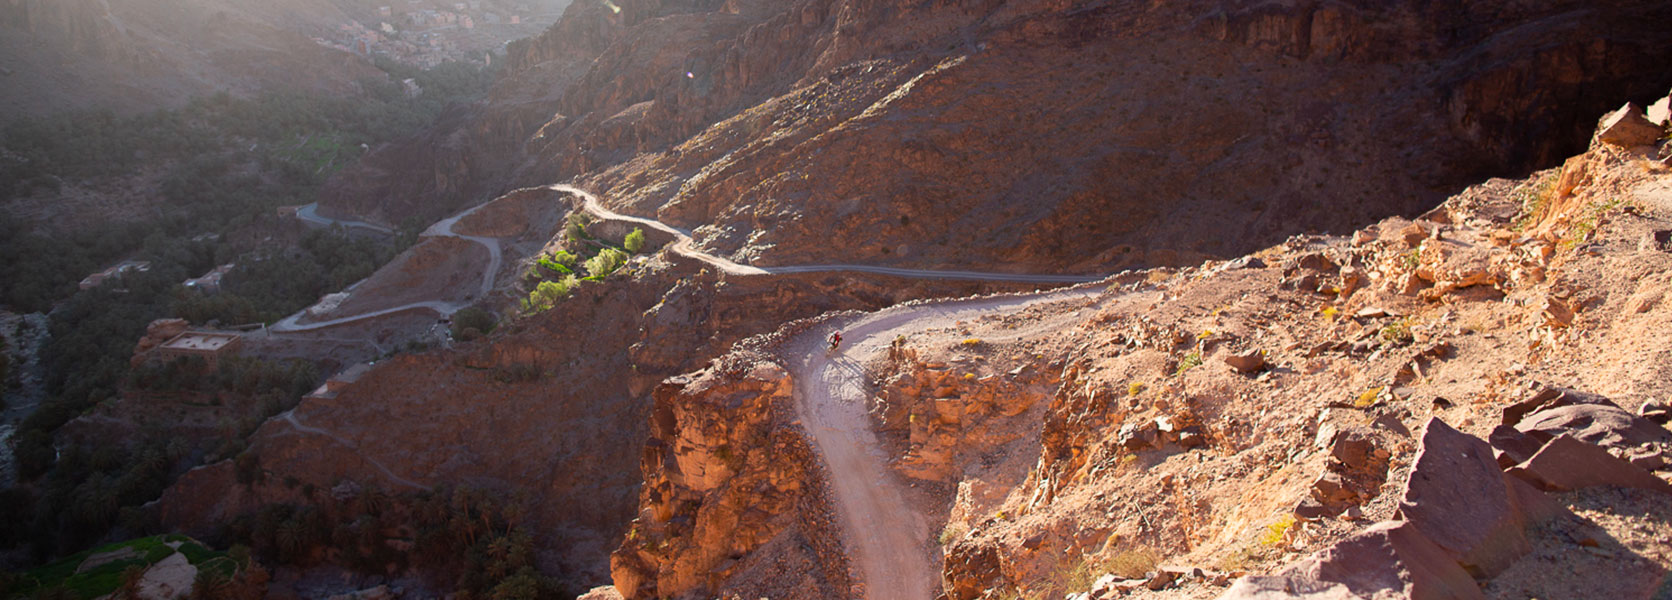 INTO THE RIFT:THE STORY OF THEPEdALED ATLAS MOUNTAIN RACE